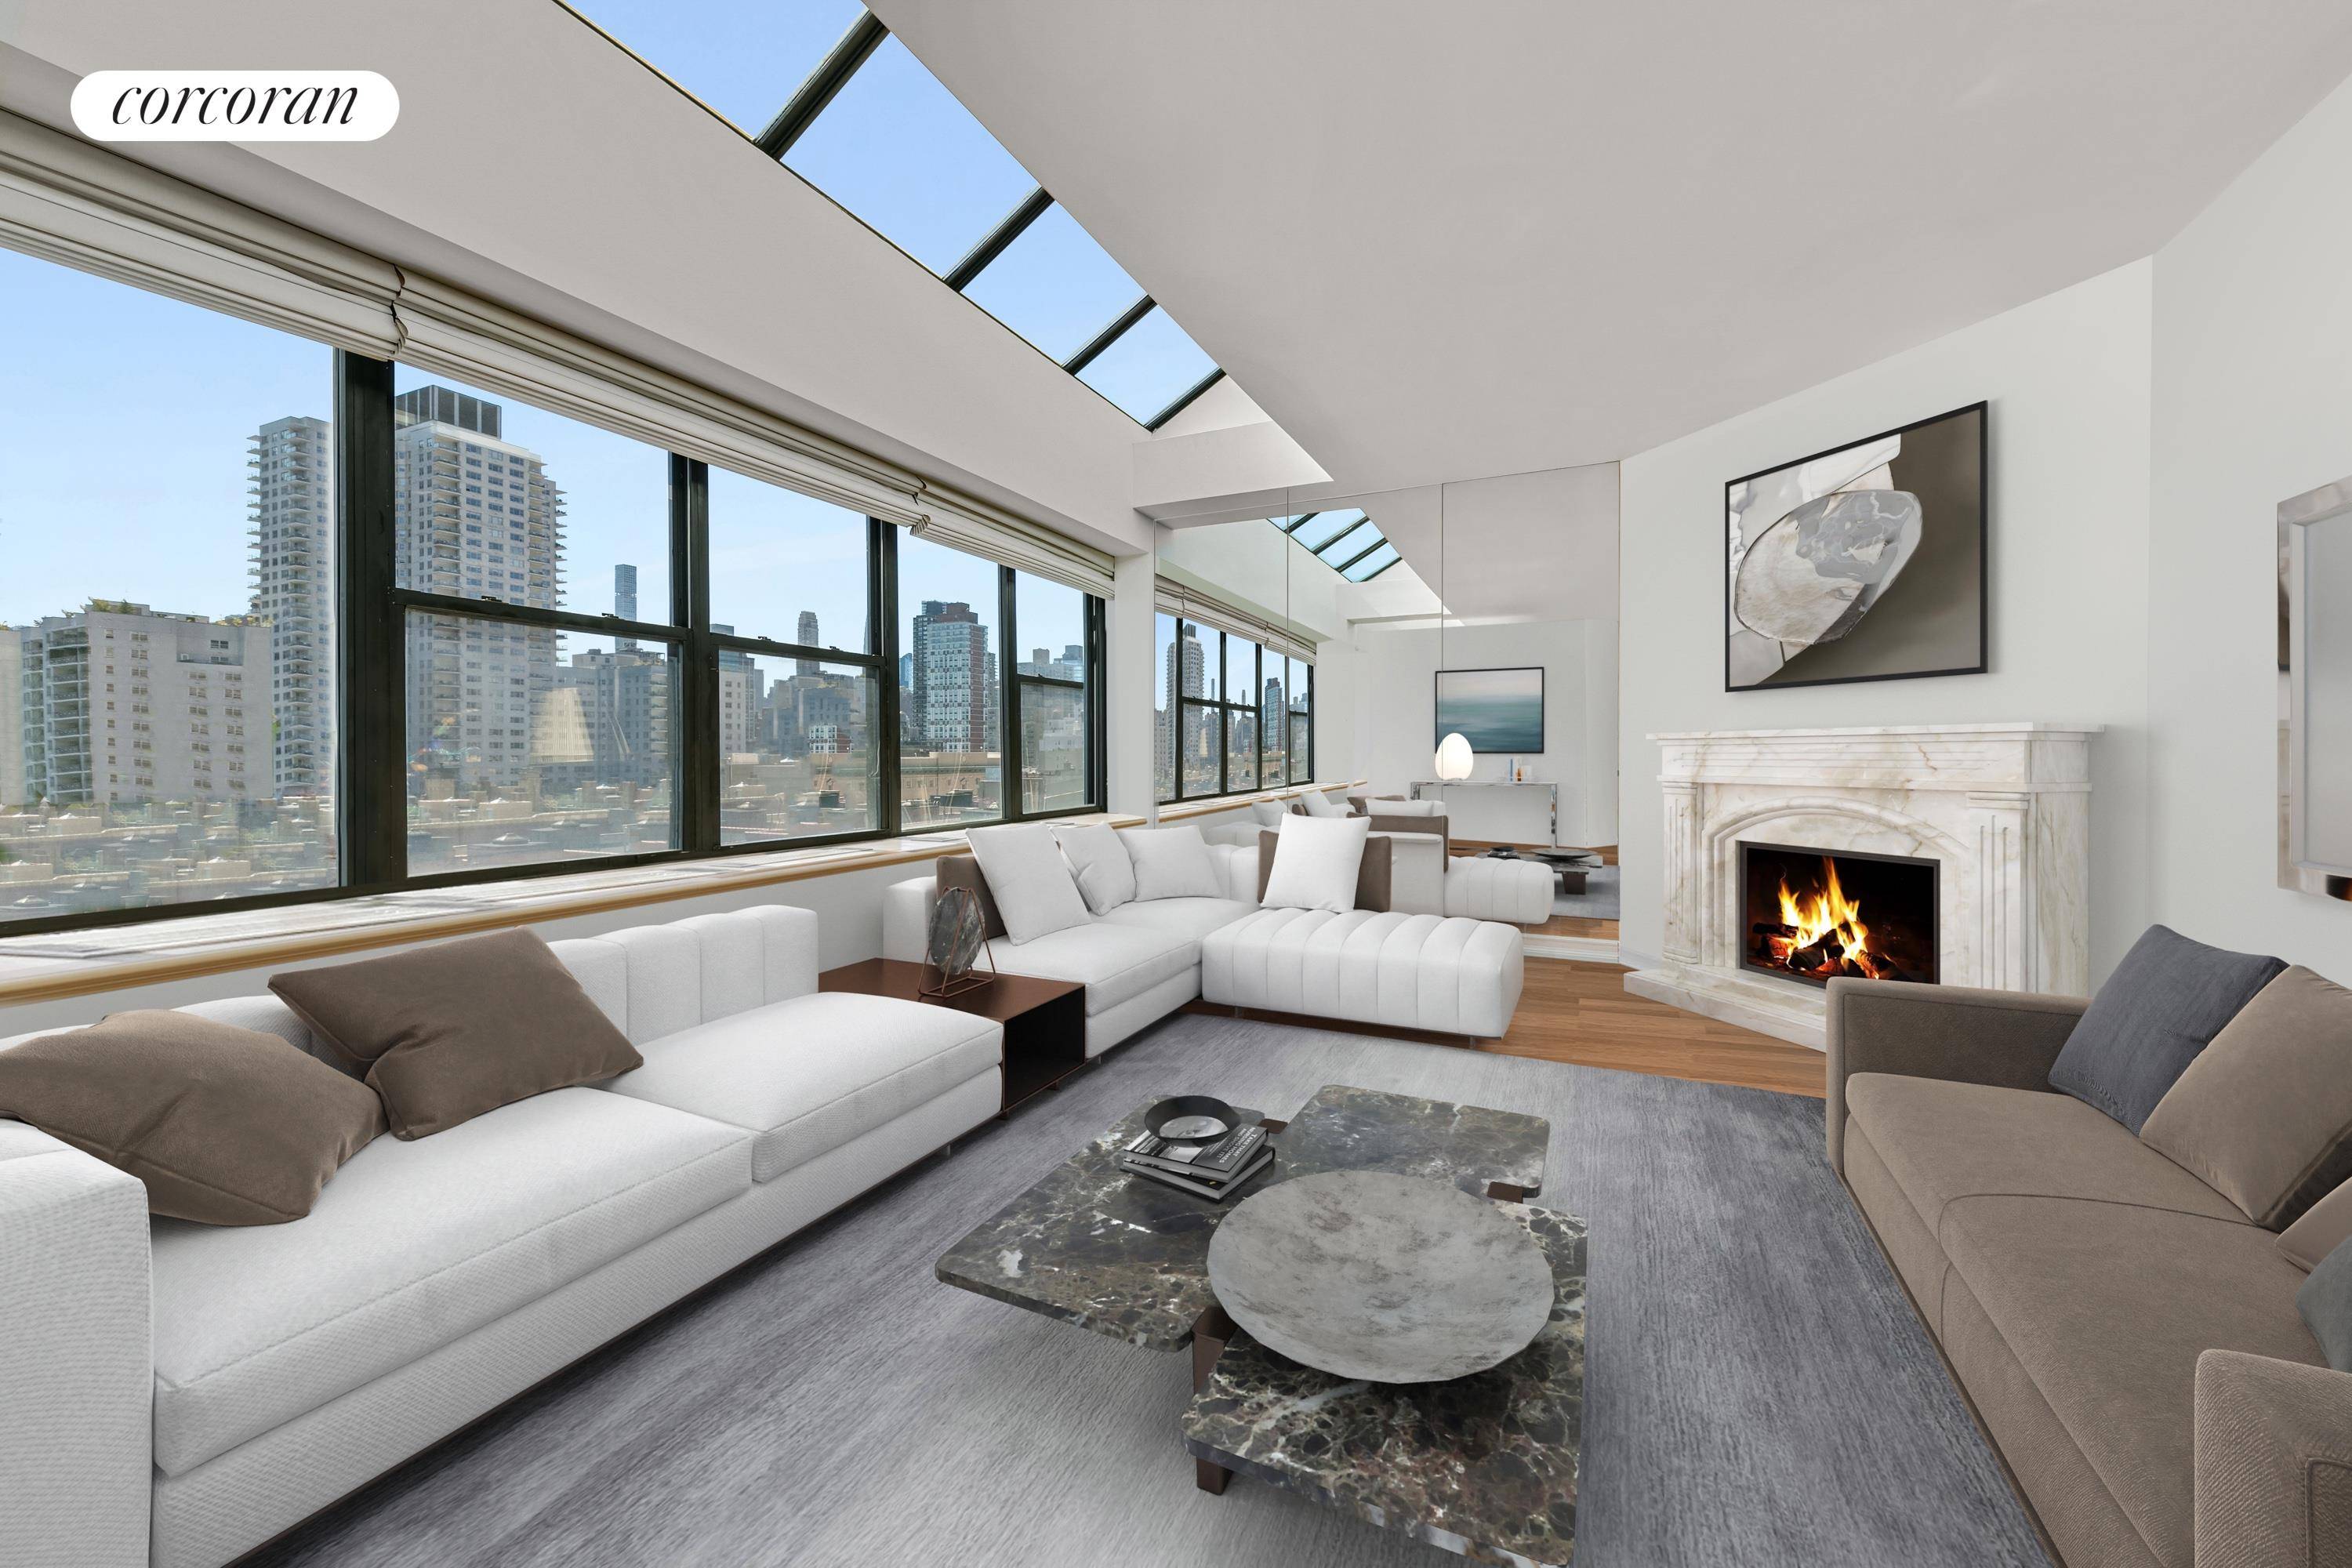 An incredible opportunity awaits at this Triplex Penthouse in the Sky !